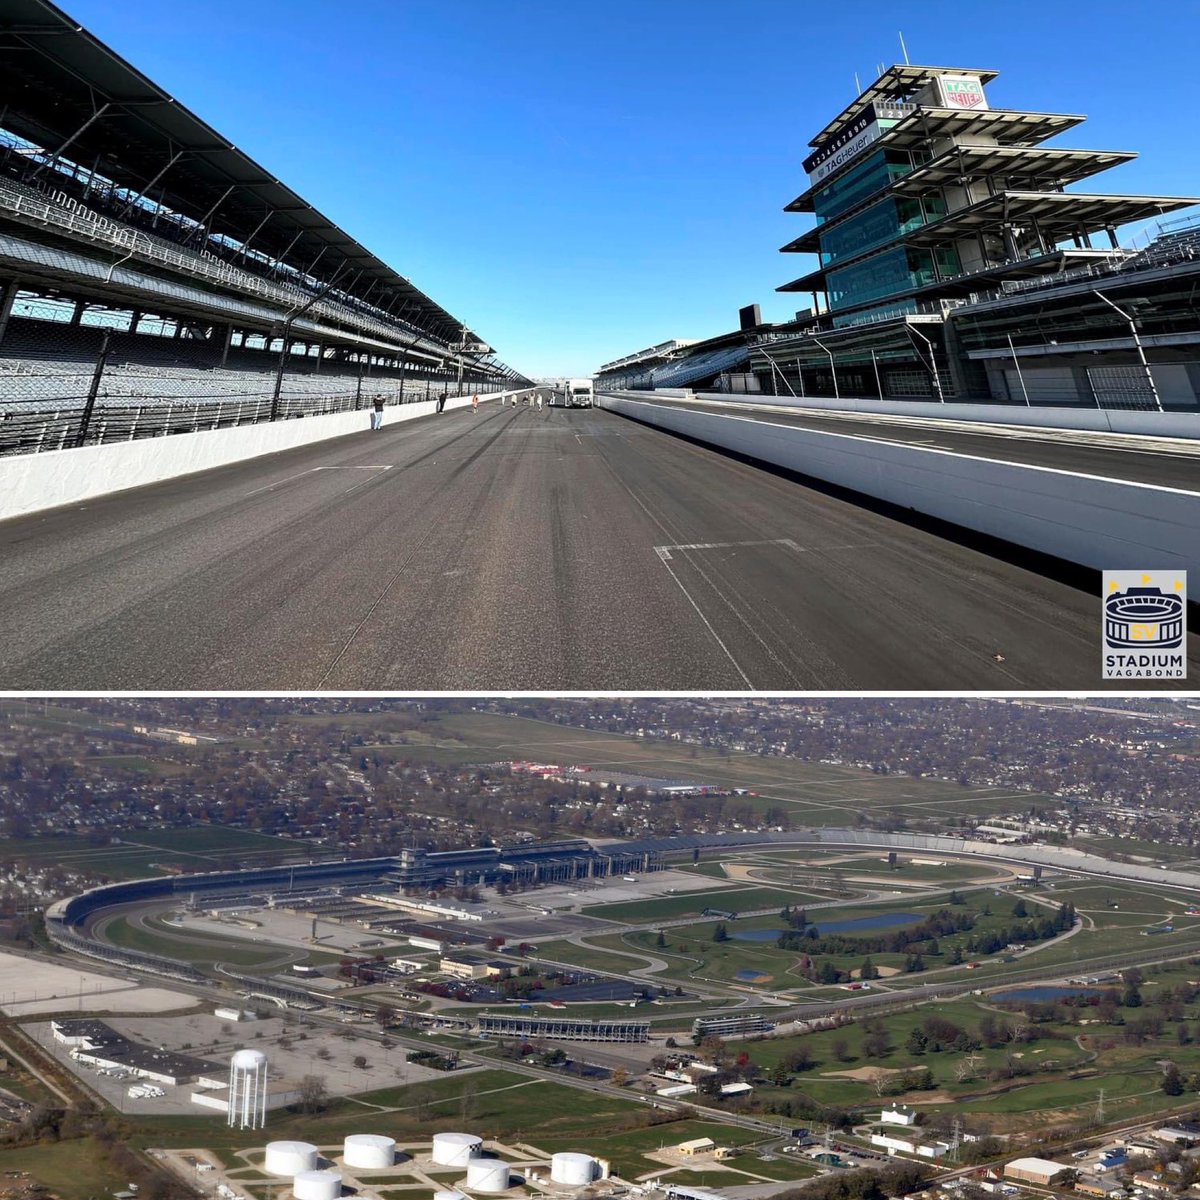 Indianapolis Motor Speedway in 2009 & 2023 (top) - Home of the Indianapolis 500 & total solar eclipse viewing site - Opened 1909 - Capacity 257,327 #indy #indycar #racing #indianapolis #formula #nascar #indy500 #EclipseSolar2024 #eclipse2024 #eclipse #solarexclipse #totality